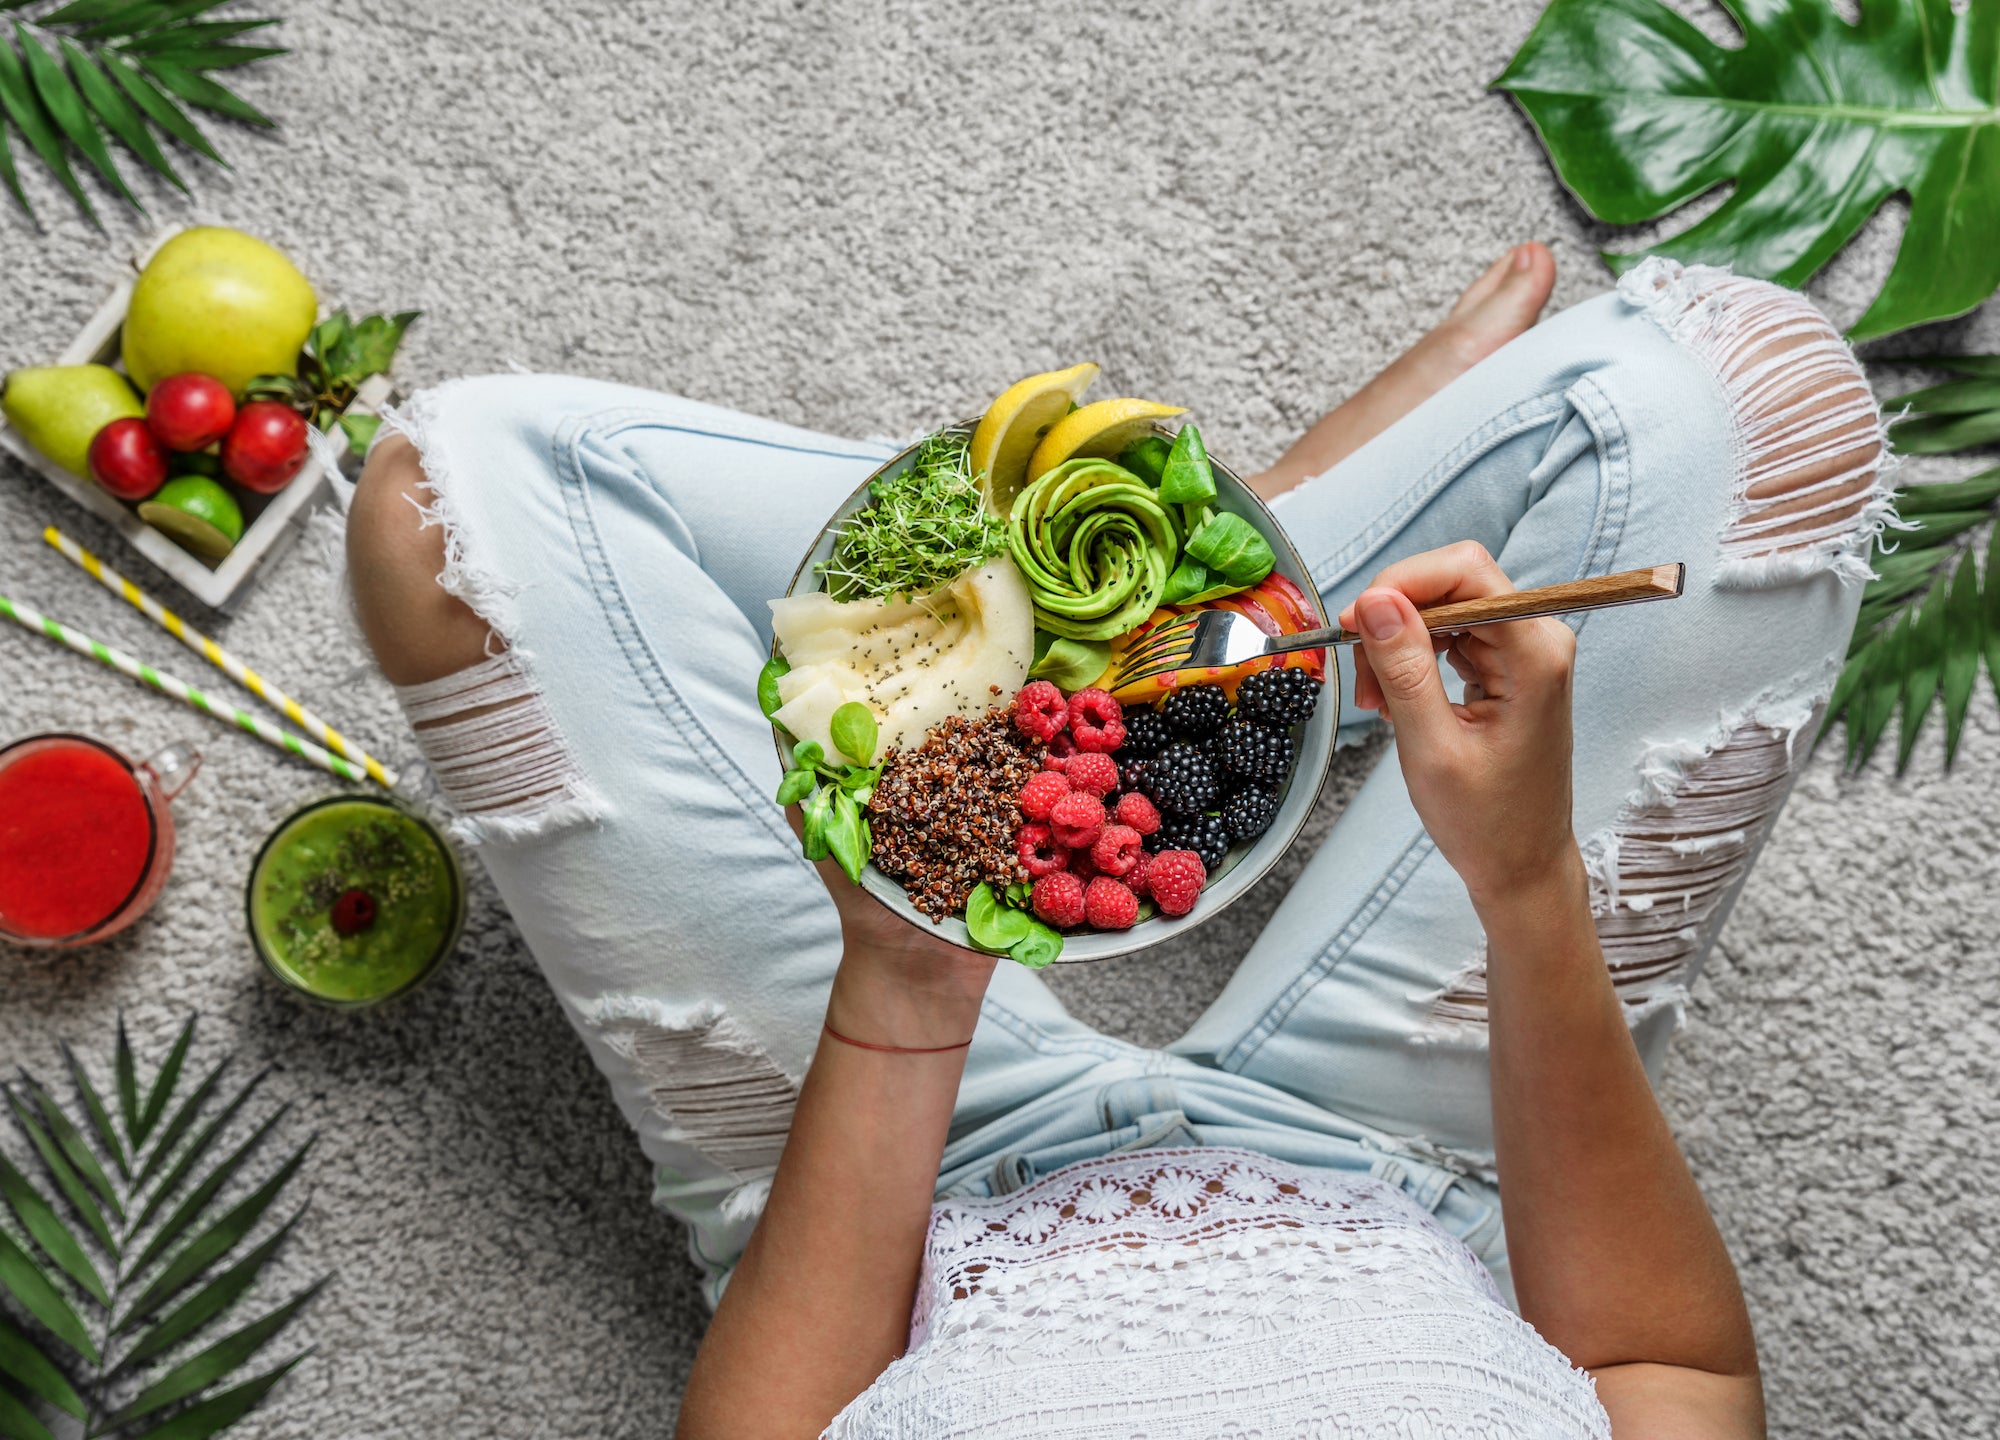 A woman who is wearing light jeans and a white top is sitting in the sand and holding a bowl of vibrant fruit and vegetables.